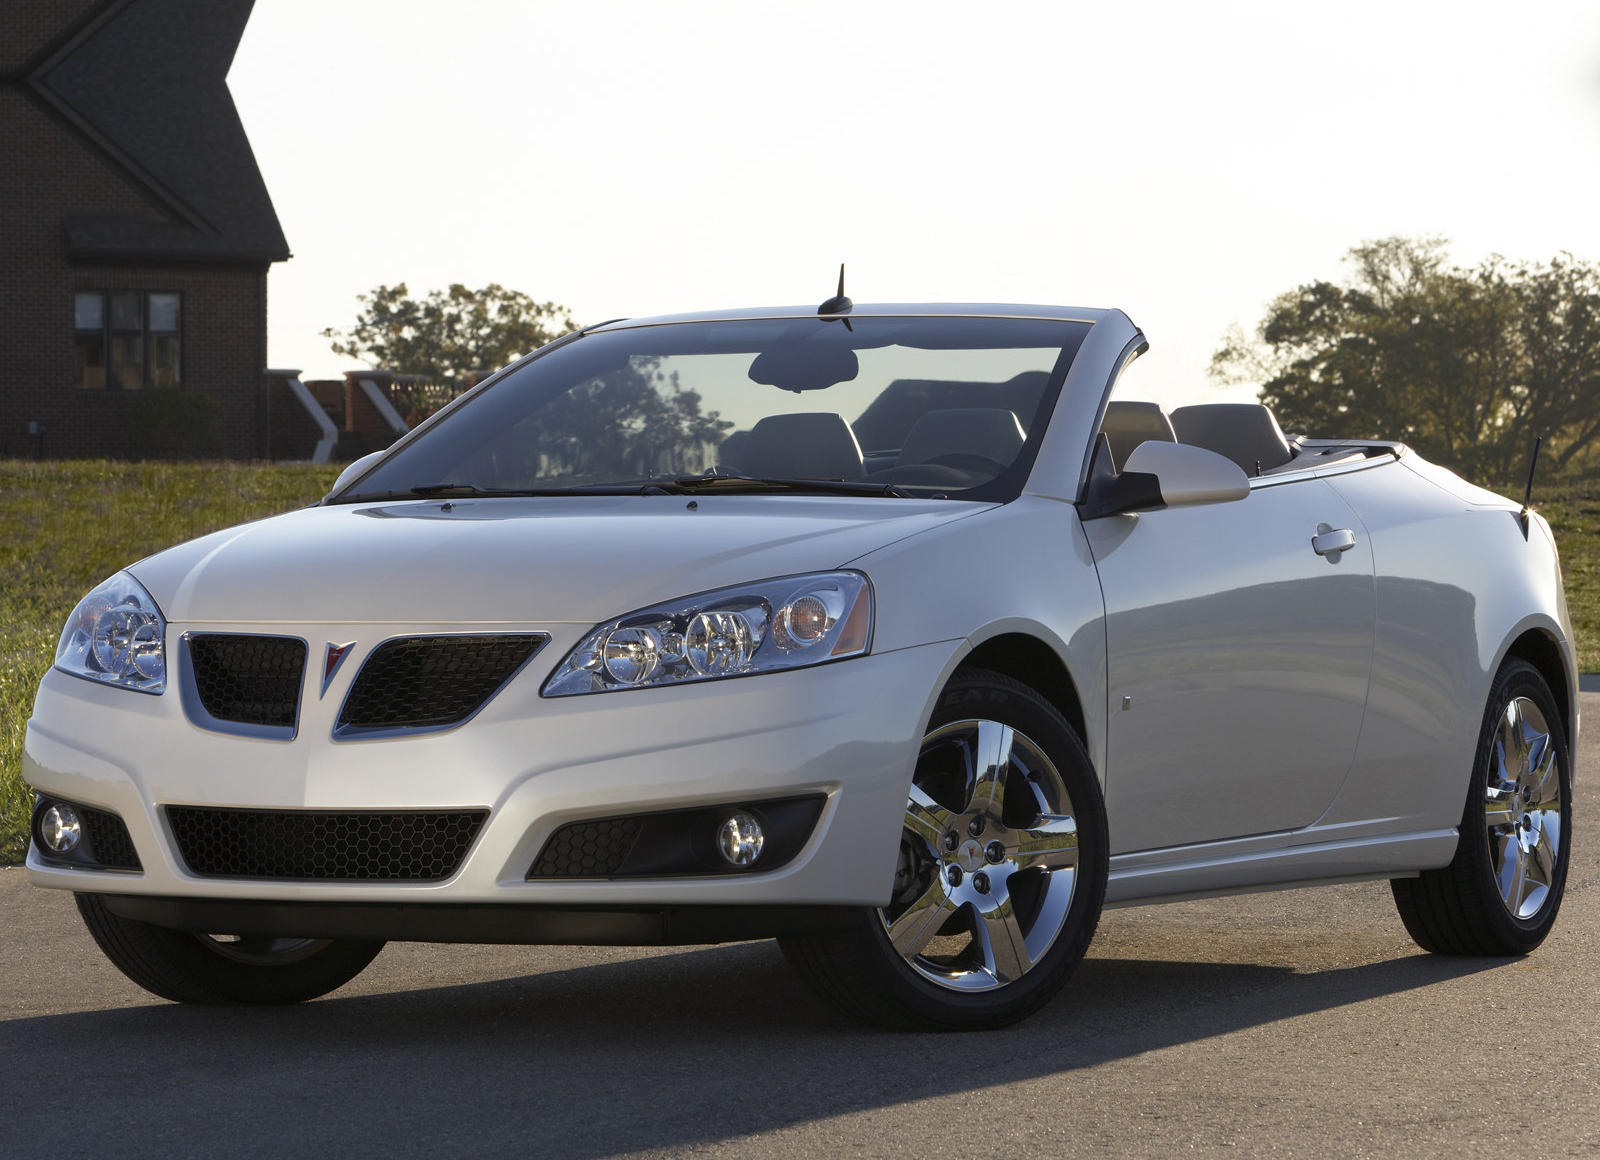 2009 Pontiac G6 Convertible Front Angle View